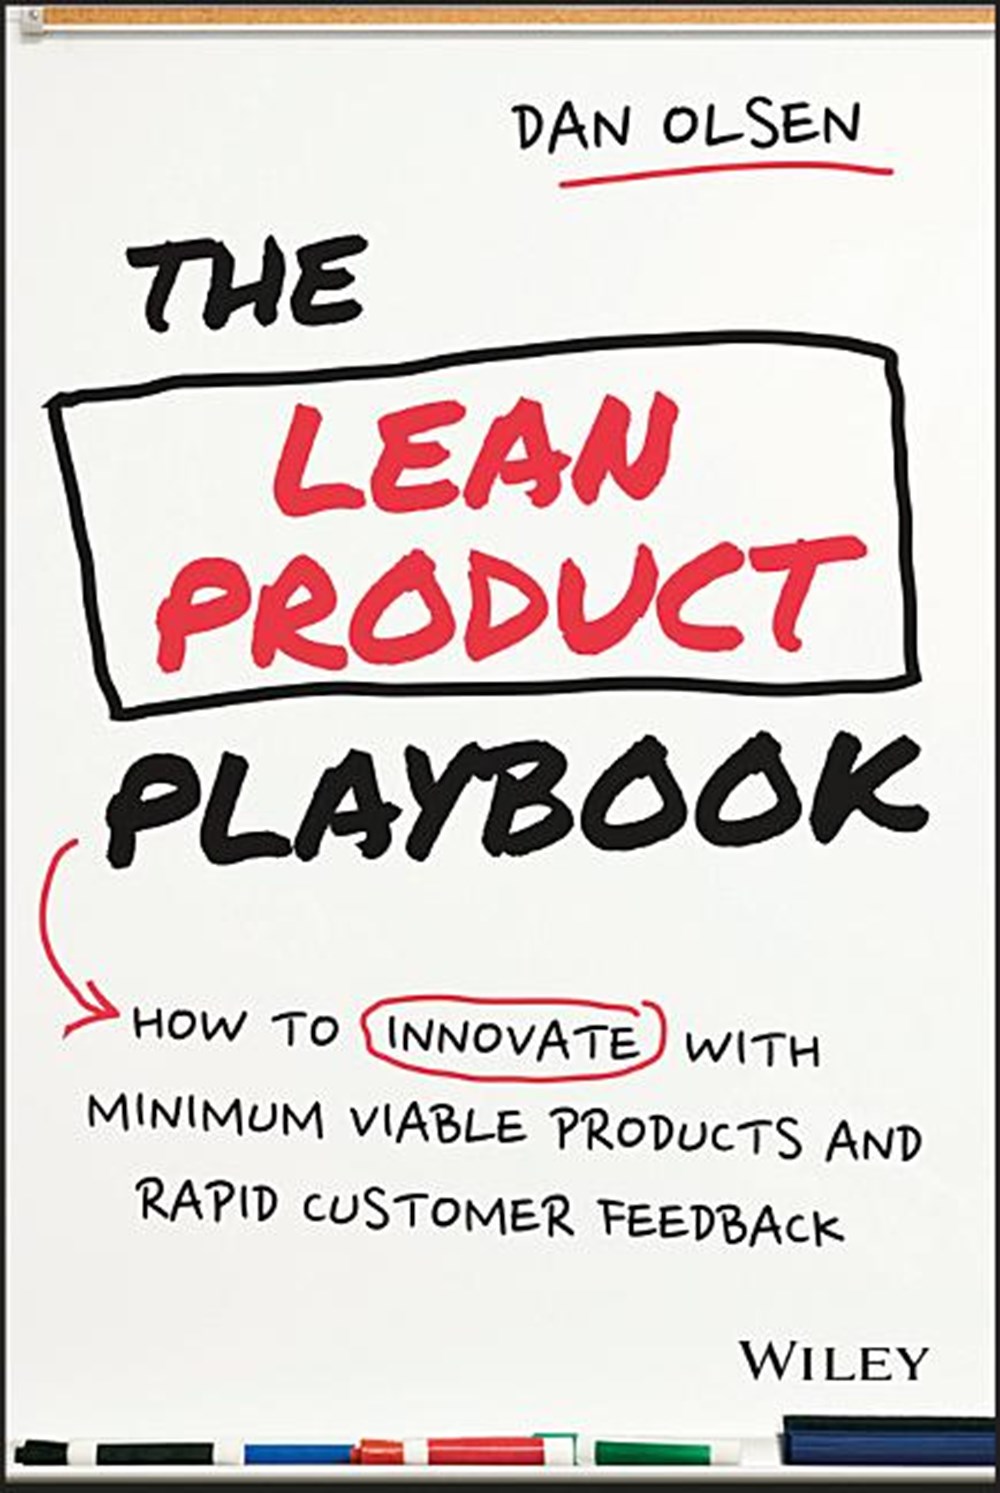 Lean Product Playbook How to Innovate with Minimum Viable Products and Rapid Customer Feedback